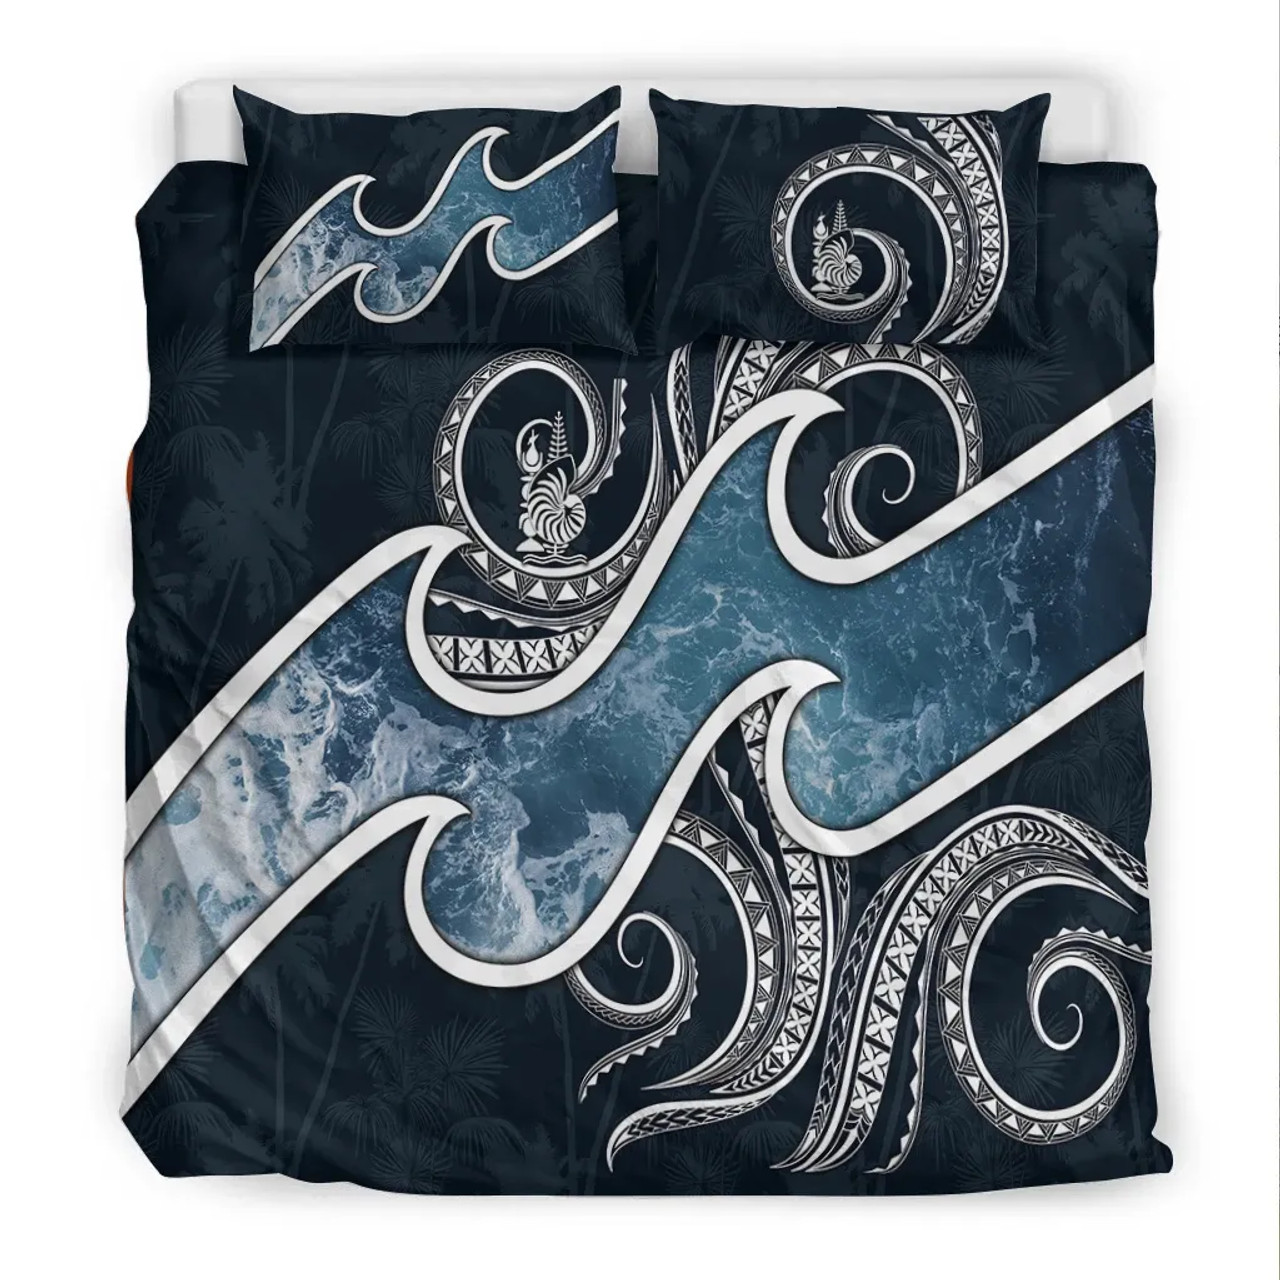 New Caledonia Bedding Set - Polynesian Gold Patterns Collection 6